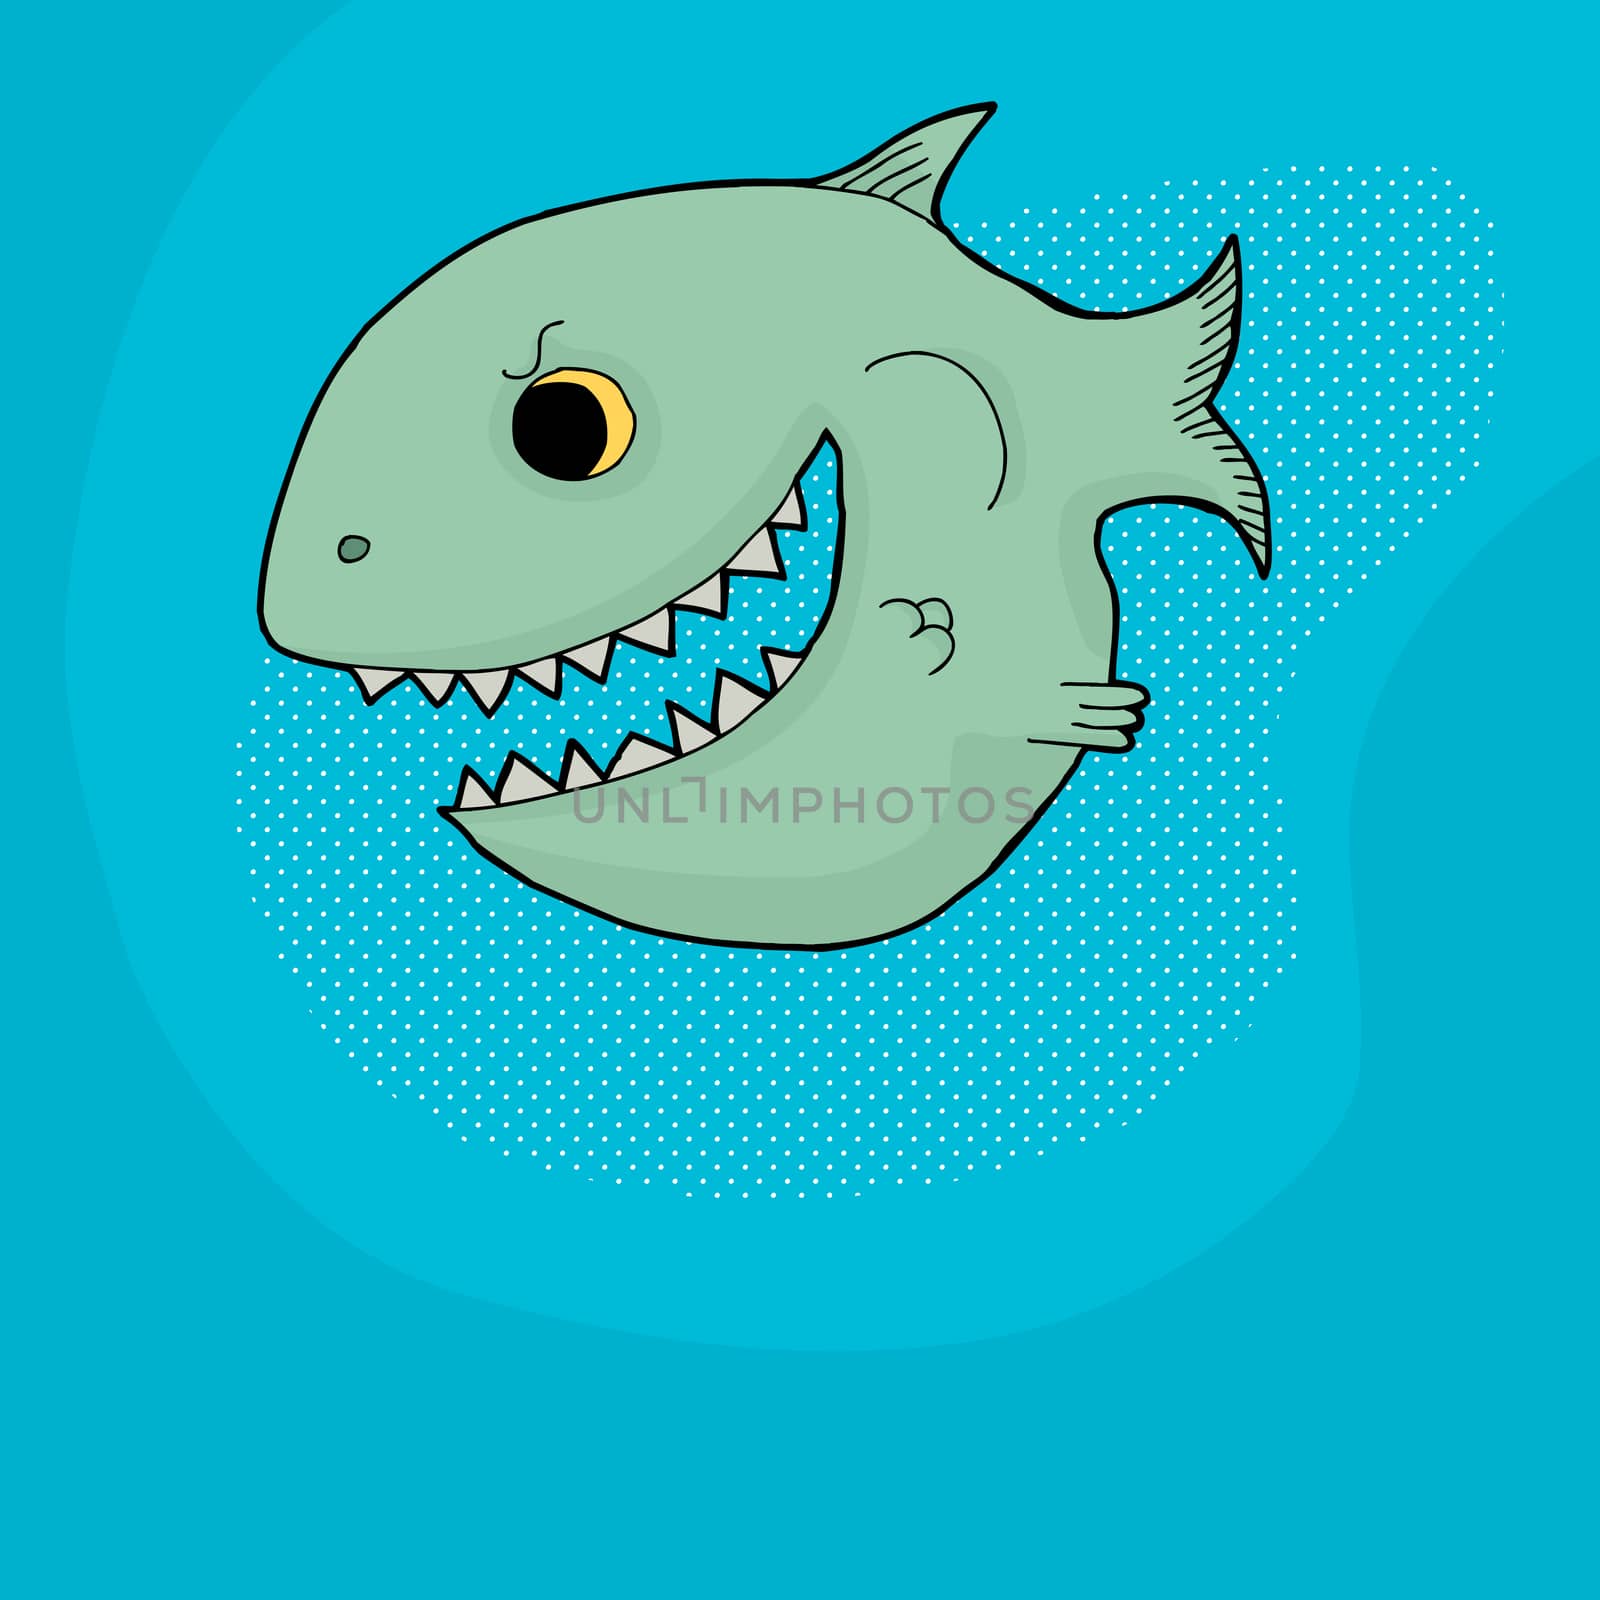 Happy grinning cartoon fish with big mouth and teeth